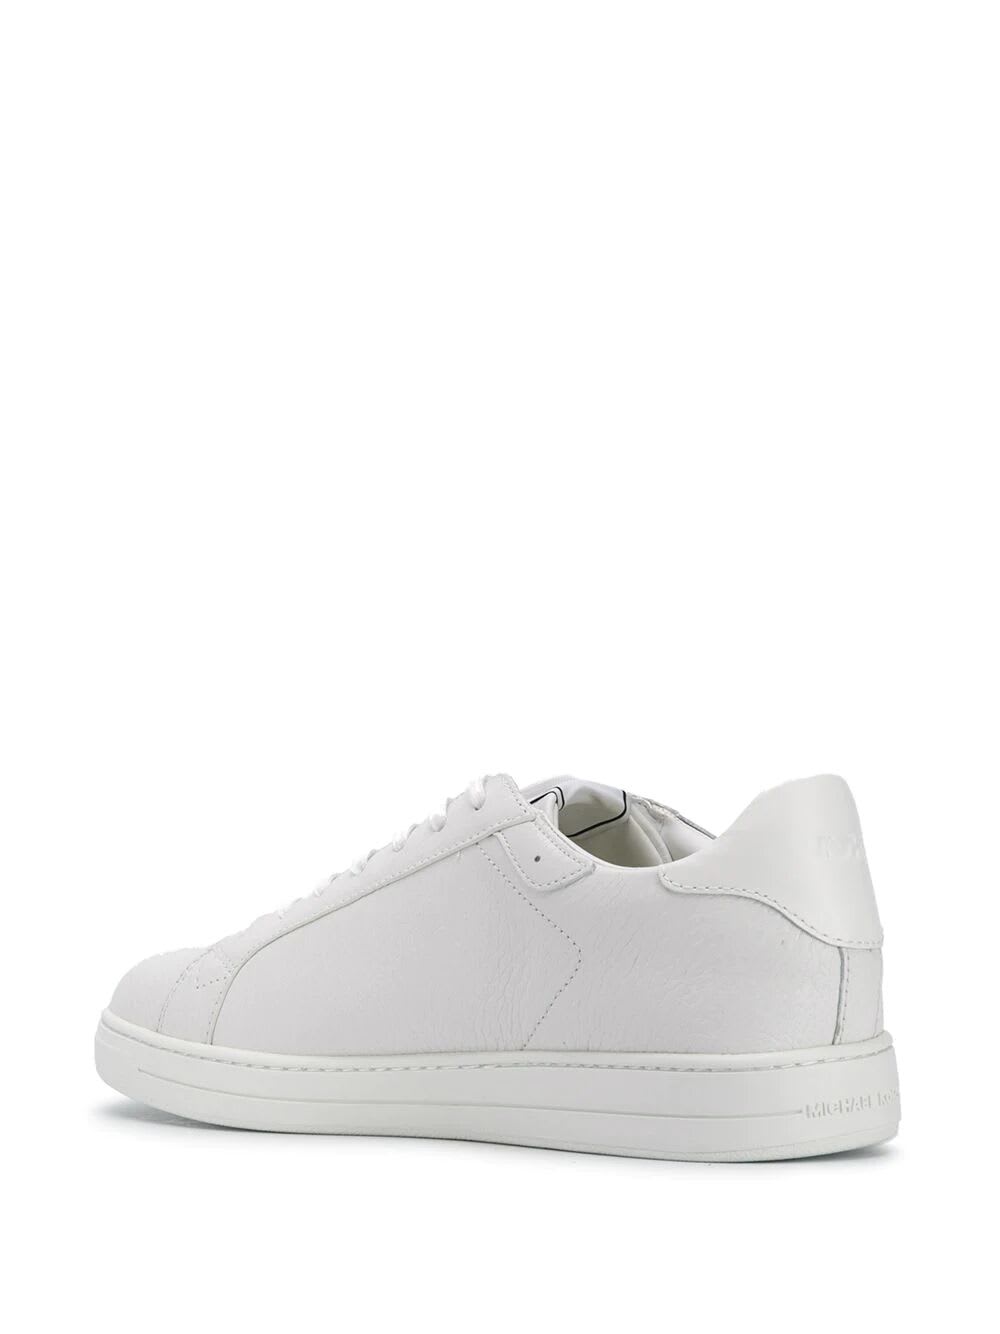 Shop Michael Kors Keating Lace Up Sneakers In Optical White